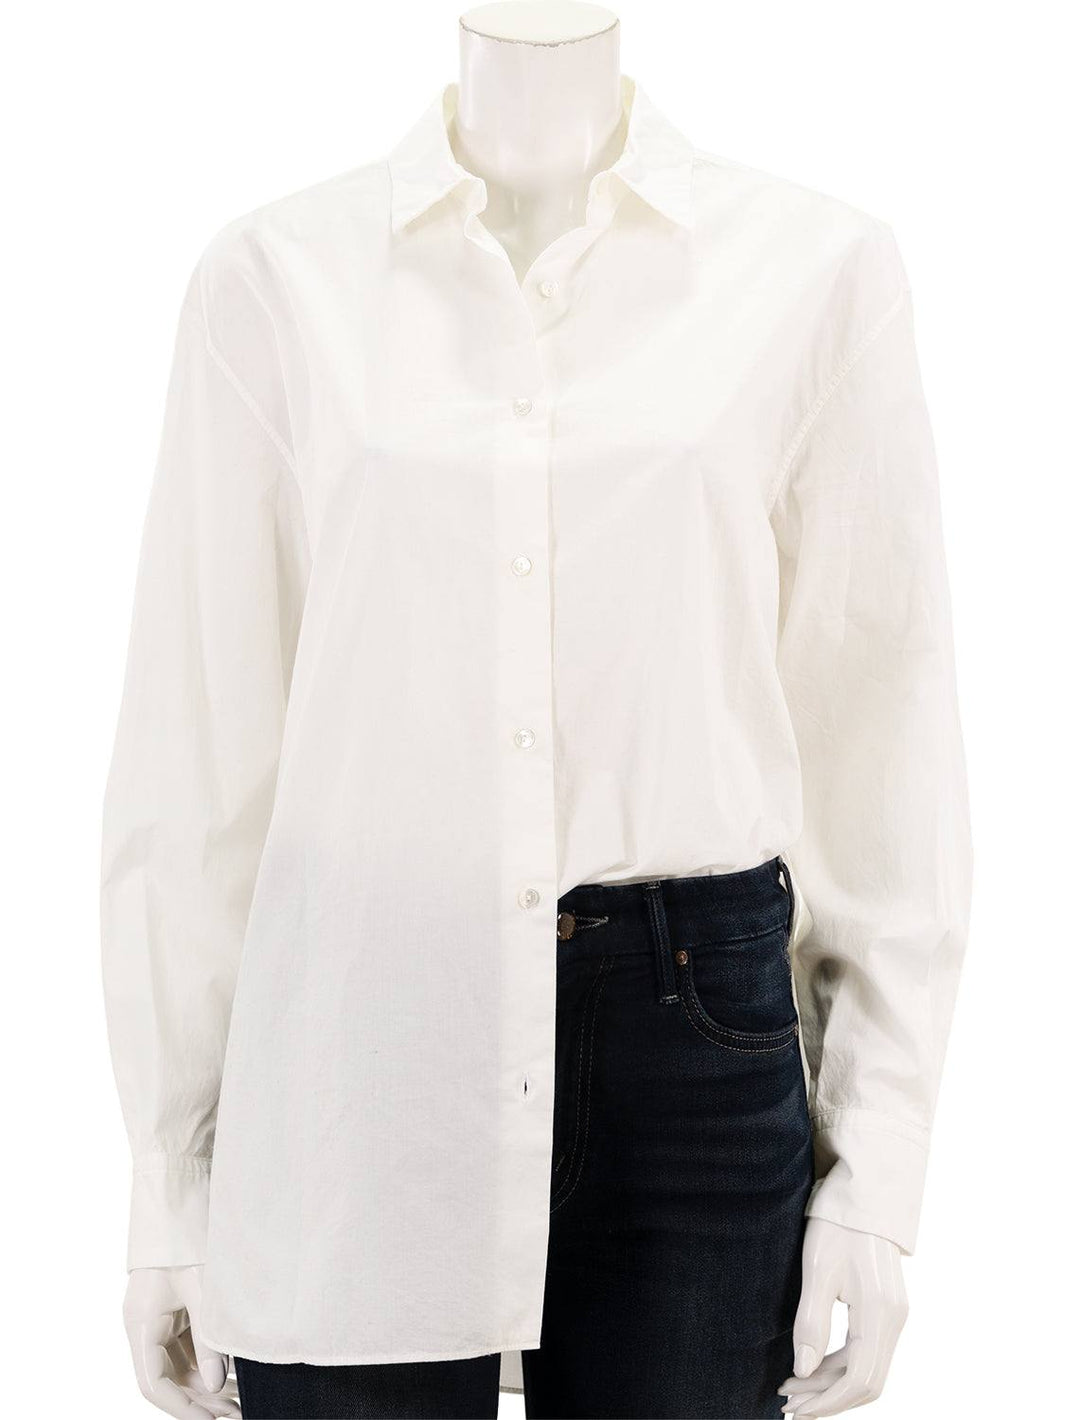 Front view of Nili Lotan's yorke shirt in white.